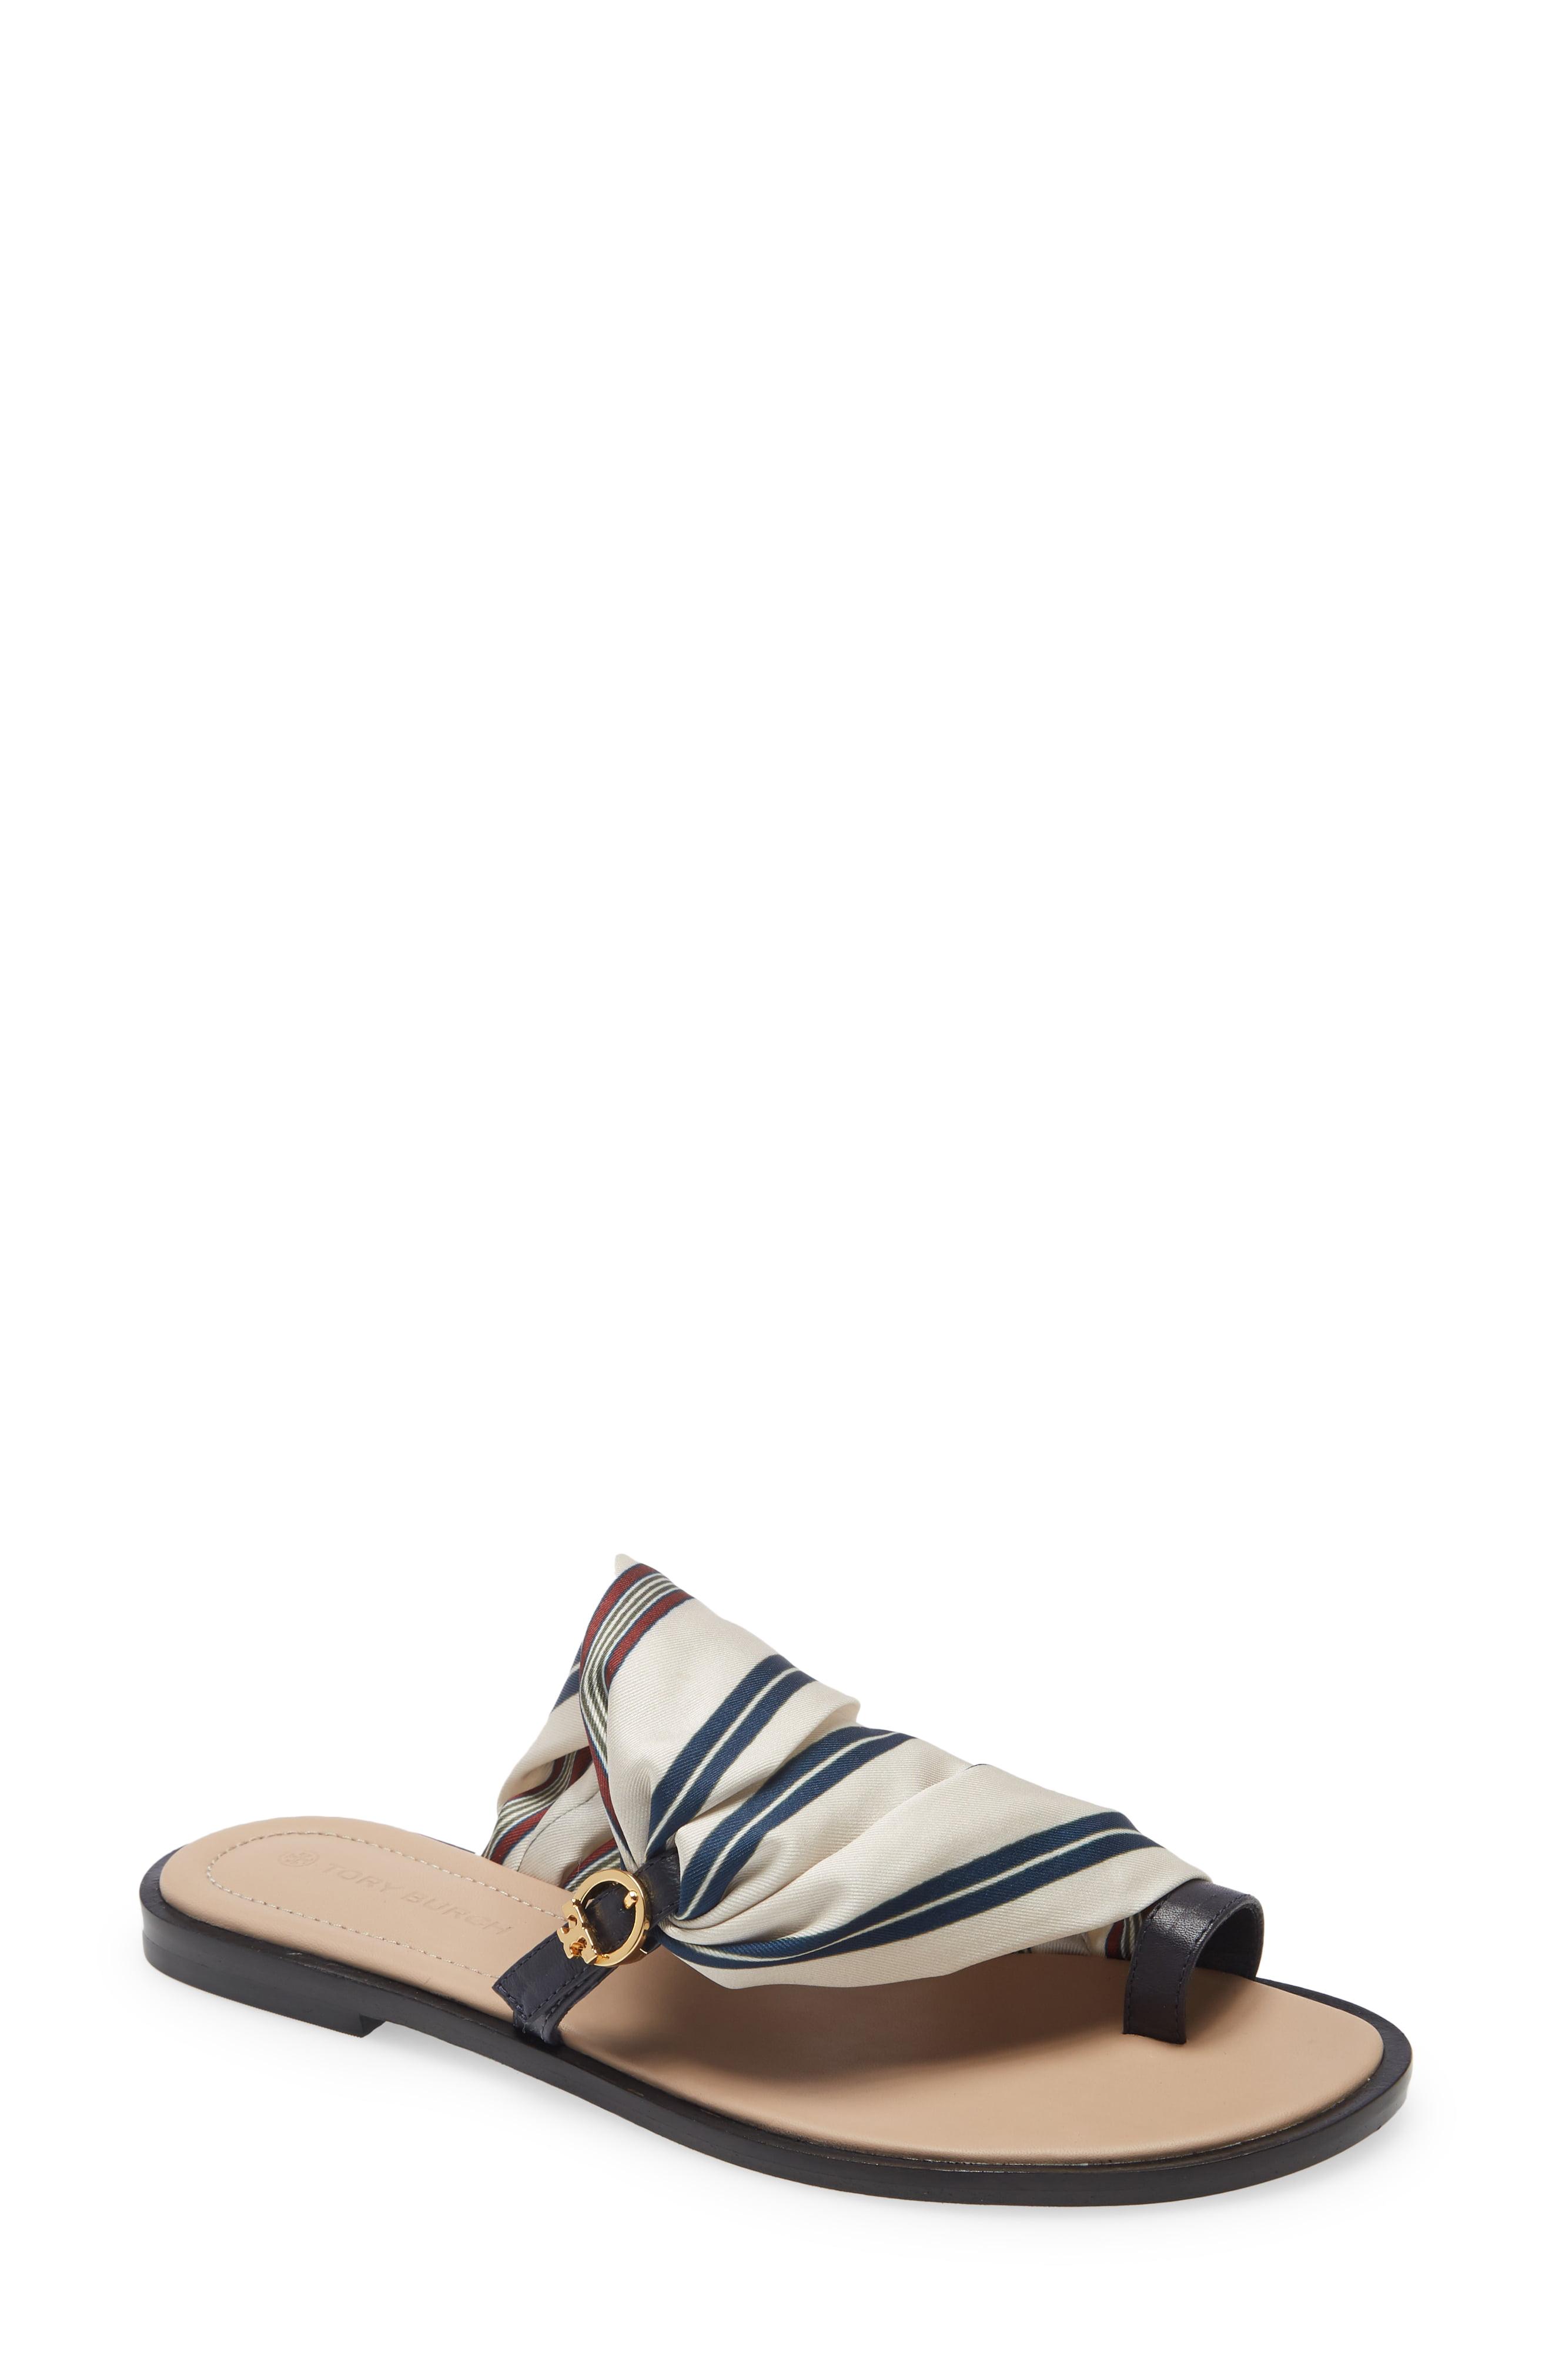 selby scarf sandal